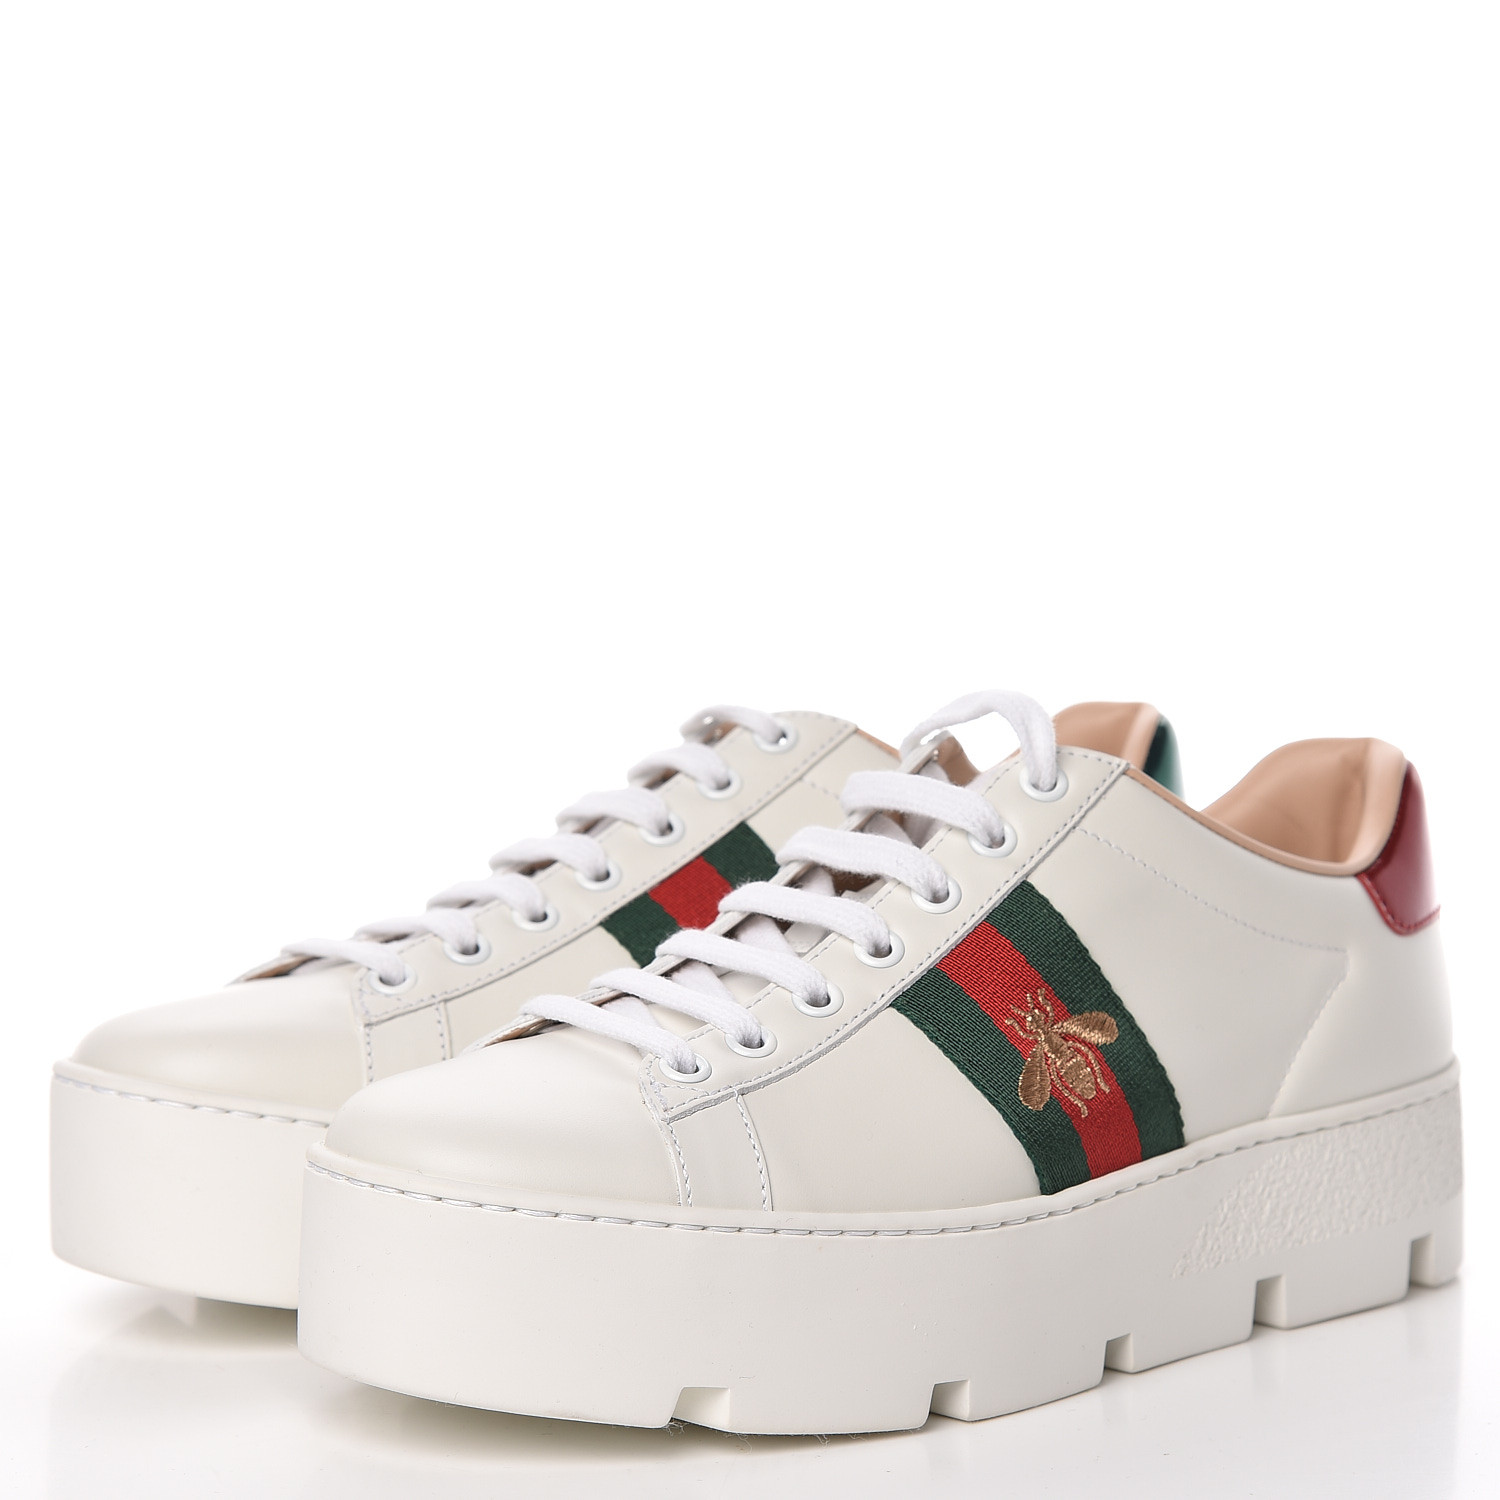 GUCCI Calfskin Embroidered Womens Ace Platform Sneakers 37.5 White 477173